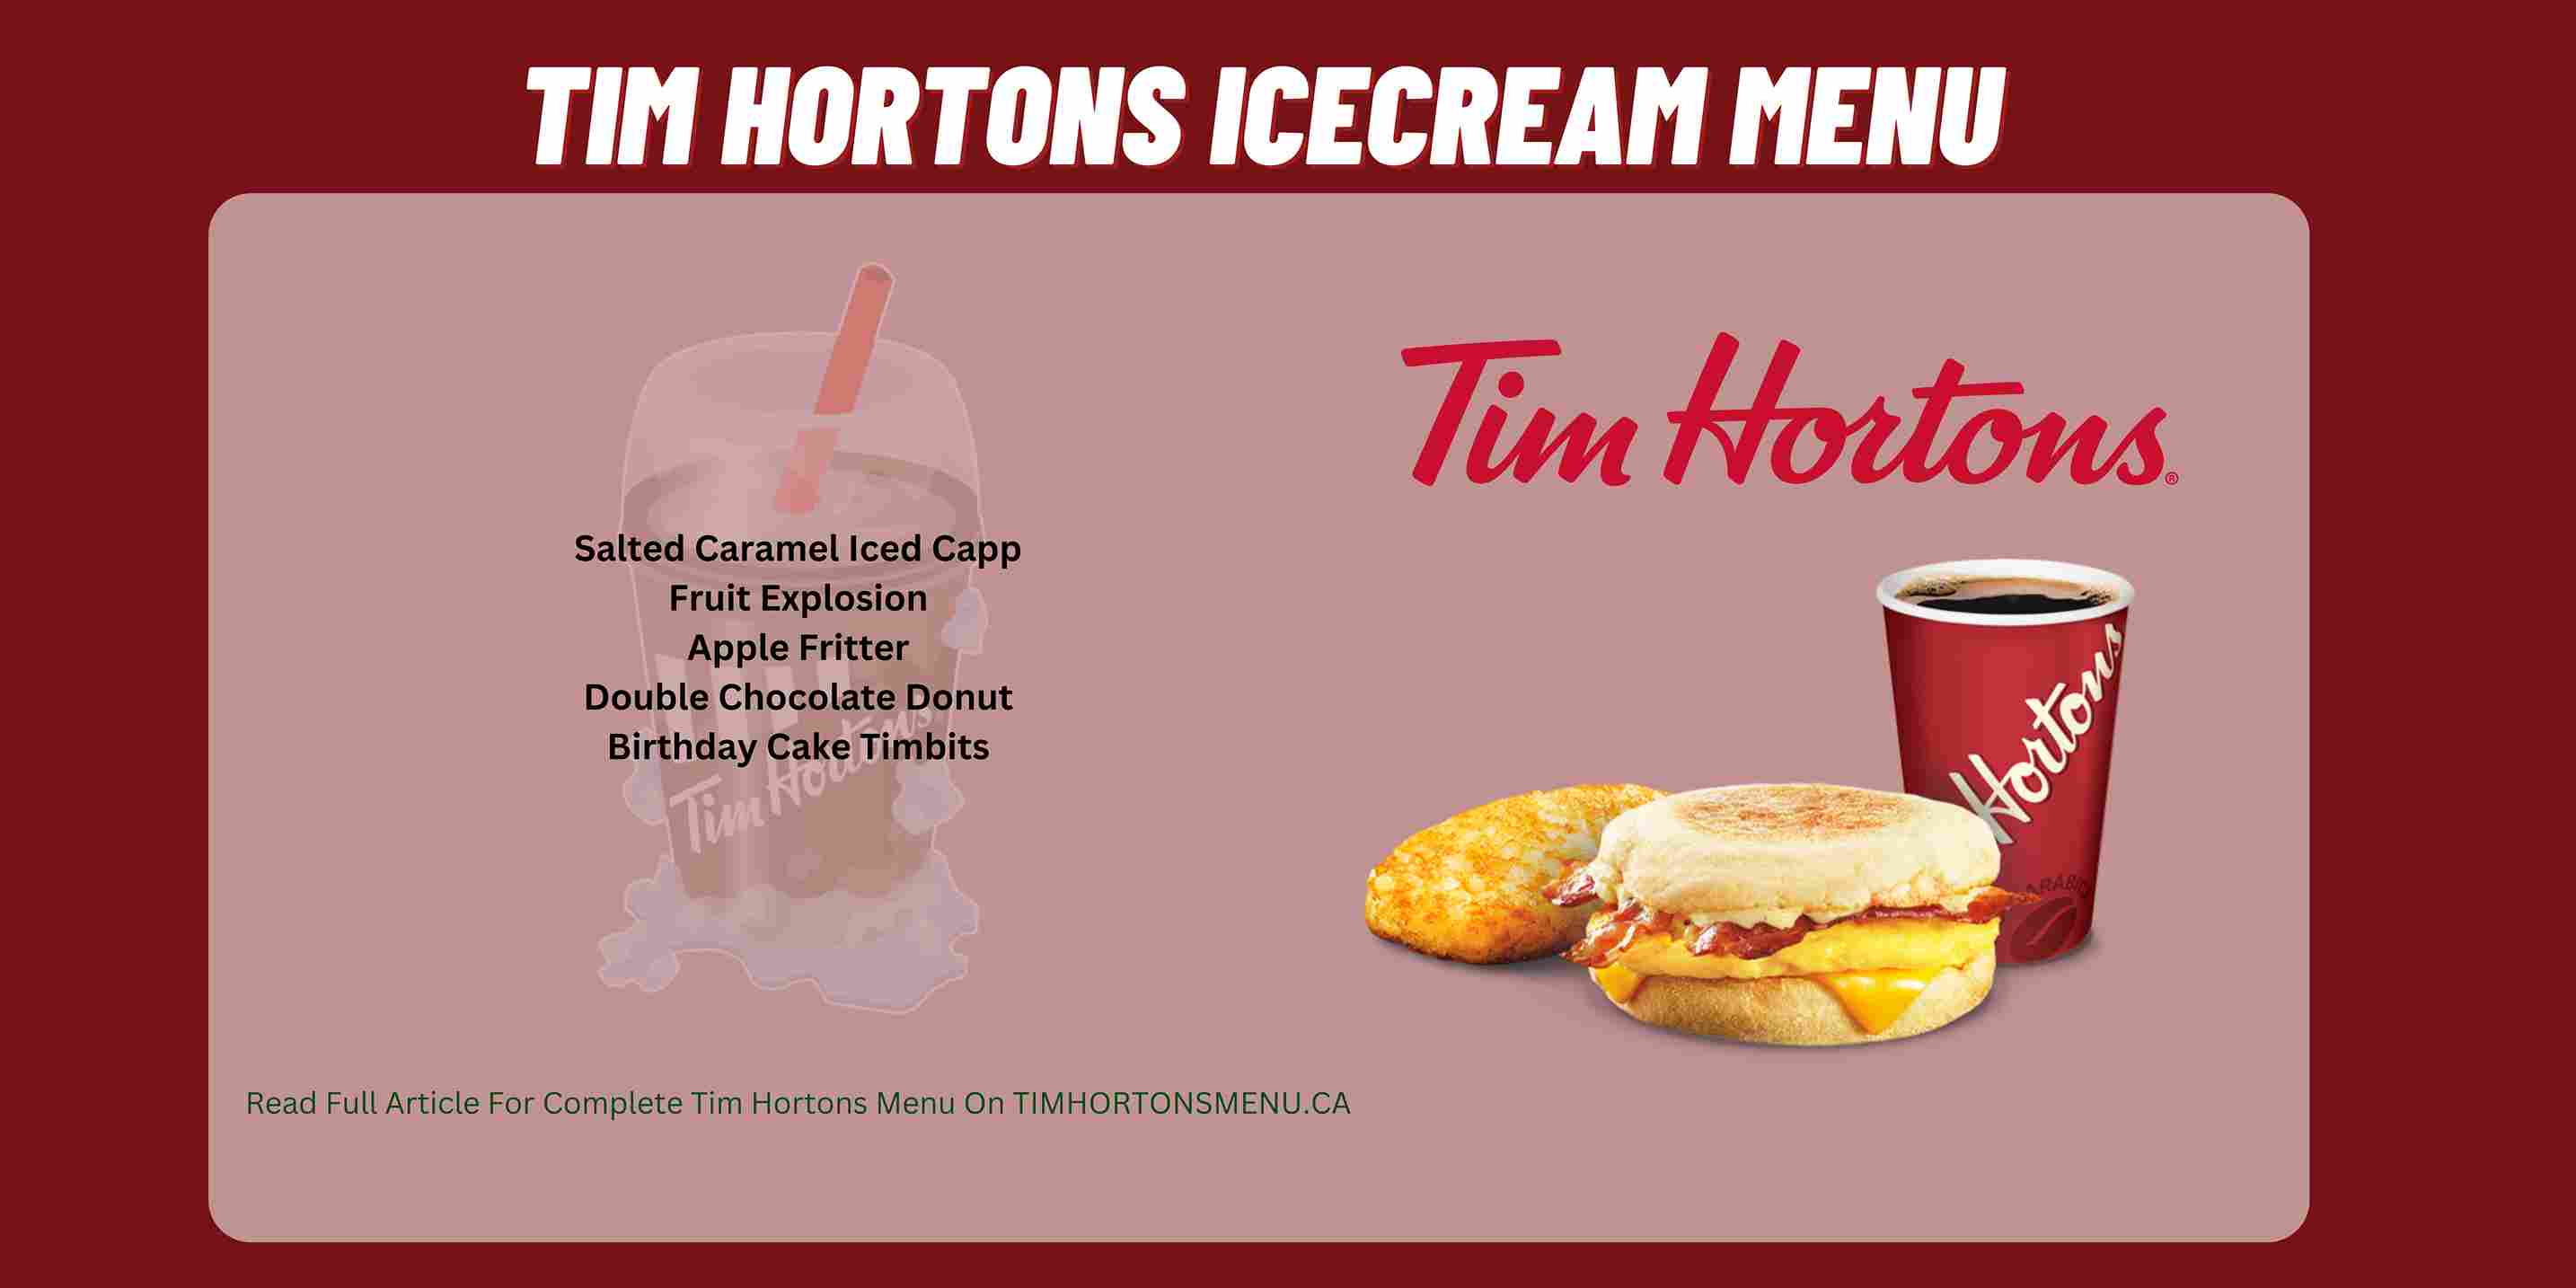 Breakfast Anytime, Any Tims! Tim Hortons® Canada makes breakfast items  available for guests any time